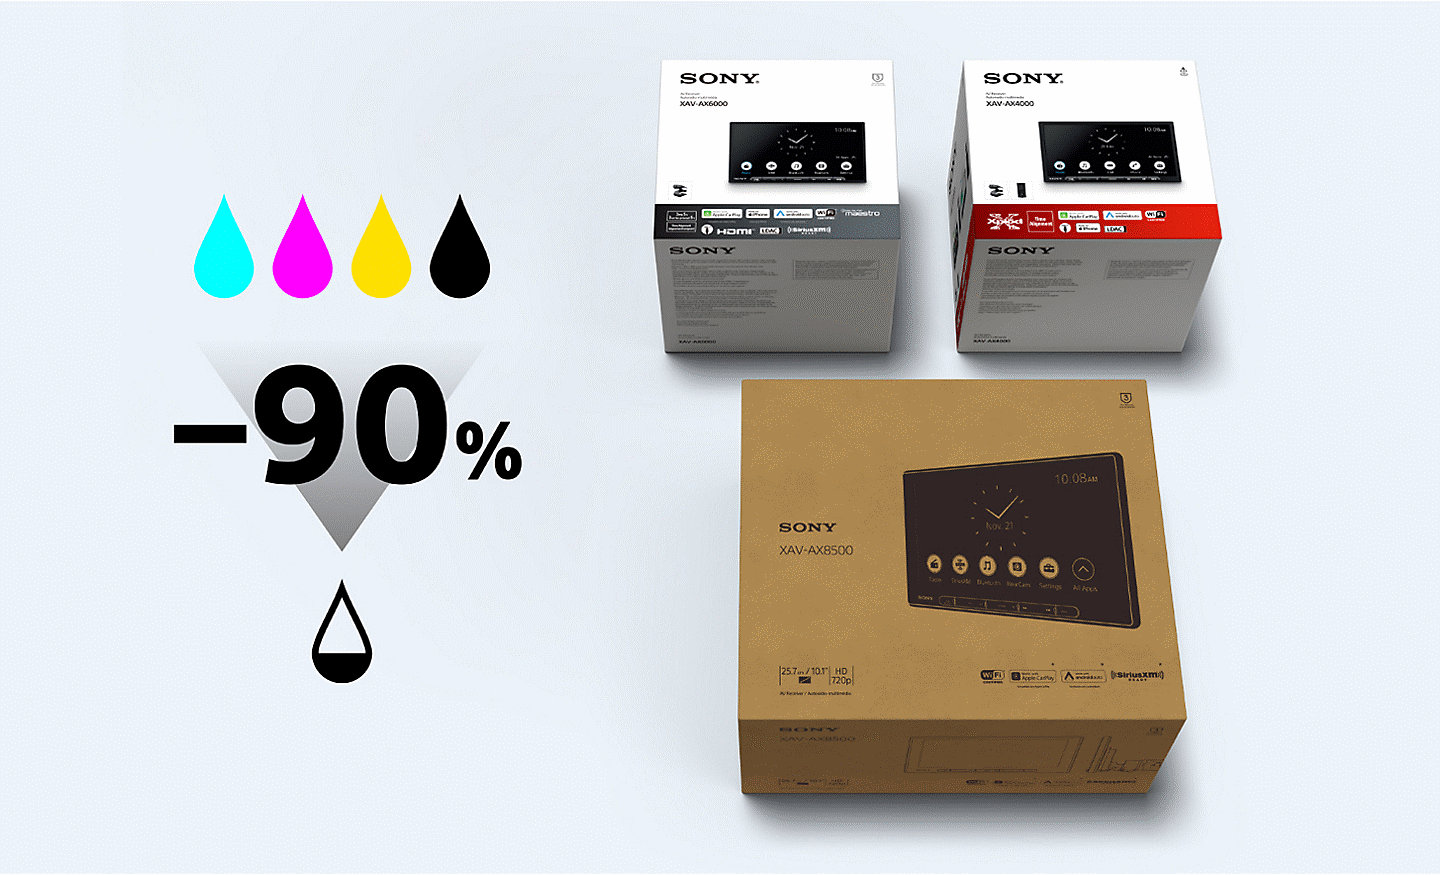 Image of various Sony packaging solutions with a graphic displaying that new packaging uses 90% less ink than previous versions